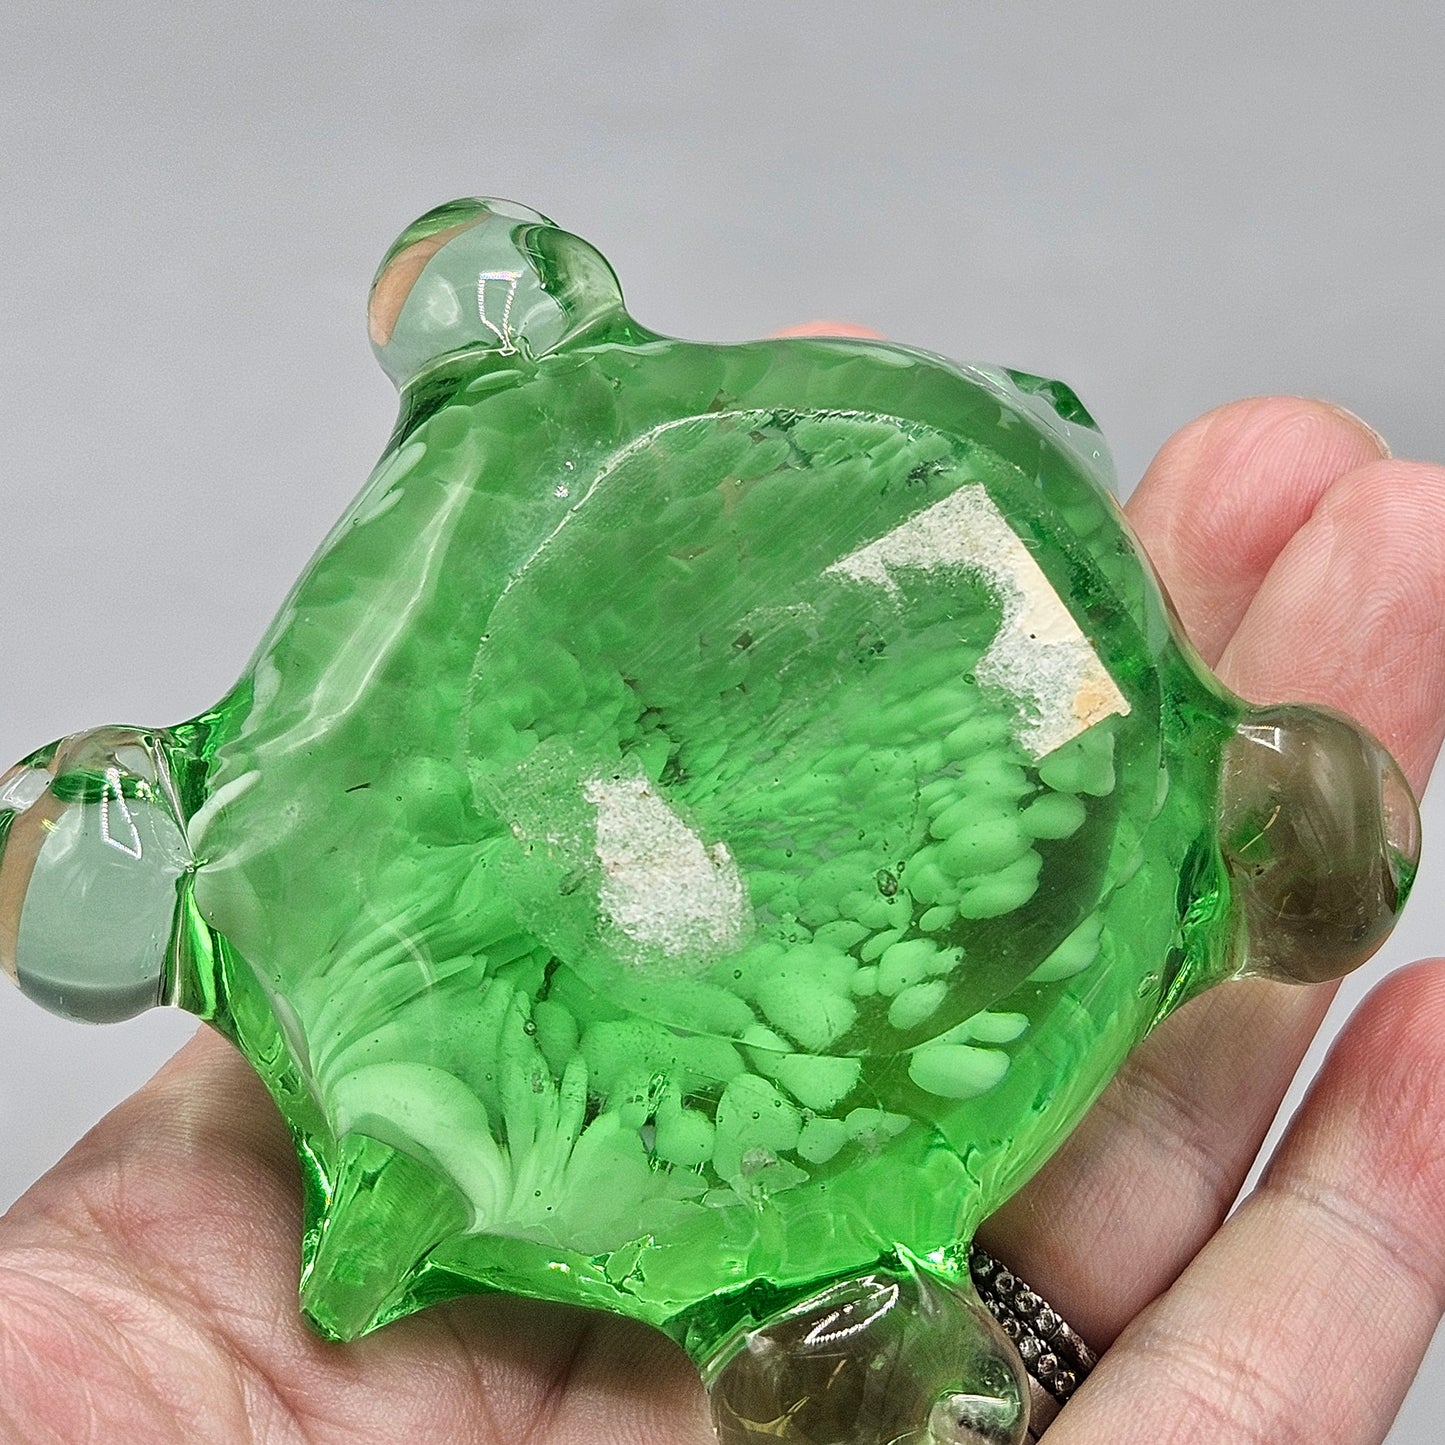 Vintage Green Glass Turtle Paperweight